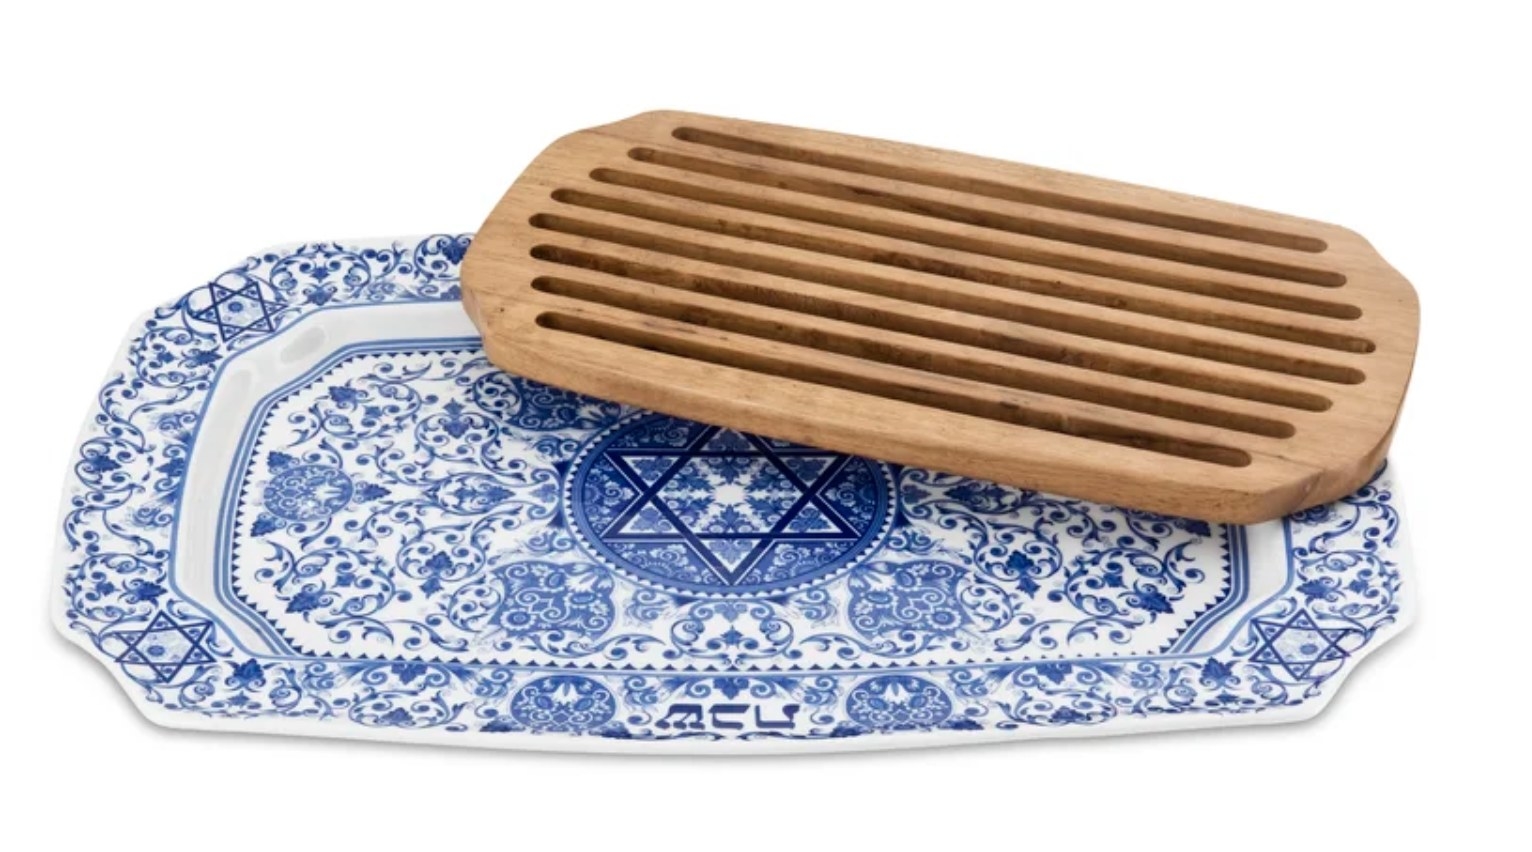 The blue and white porcelain tray has very intricate detailing including a Jewish star and a wooden bread catcher panel